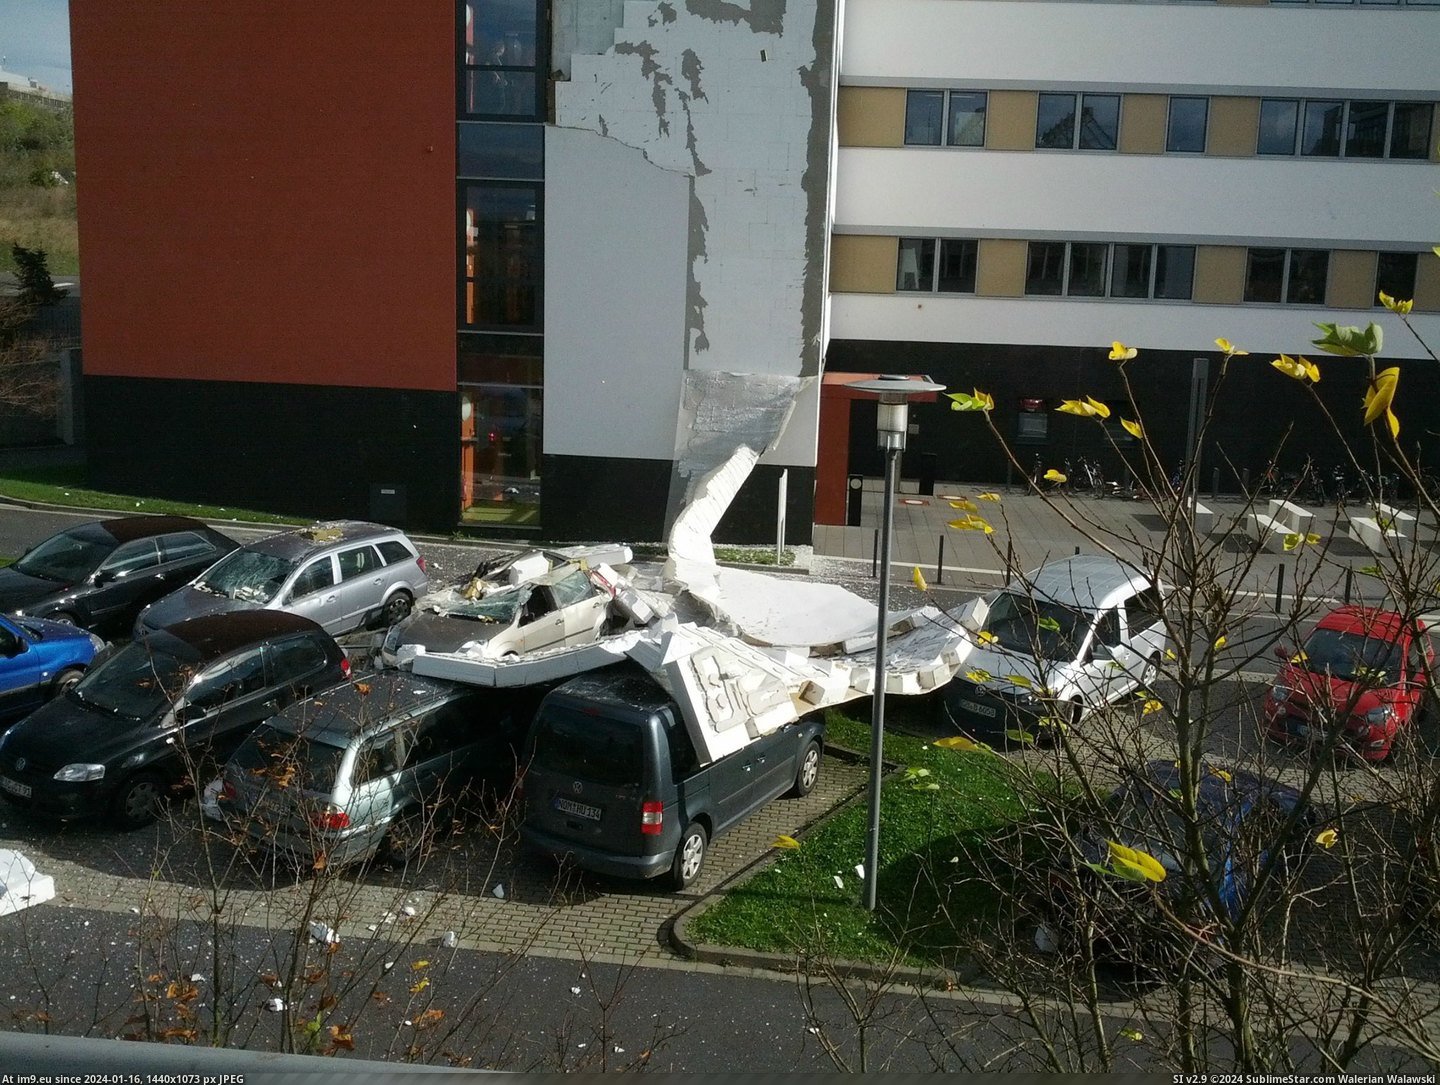 #Was #Off #Building #Fell #Lab #Wall #Sitting [Pics] Was sitting in the lab when the wall of the next building fell off. 2 Pic. (Bild von album My r/PICS favs))